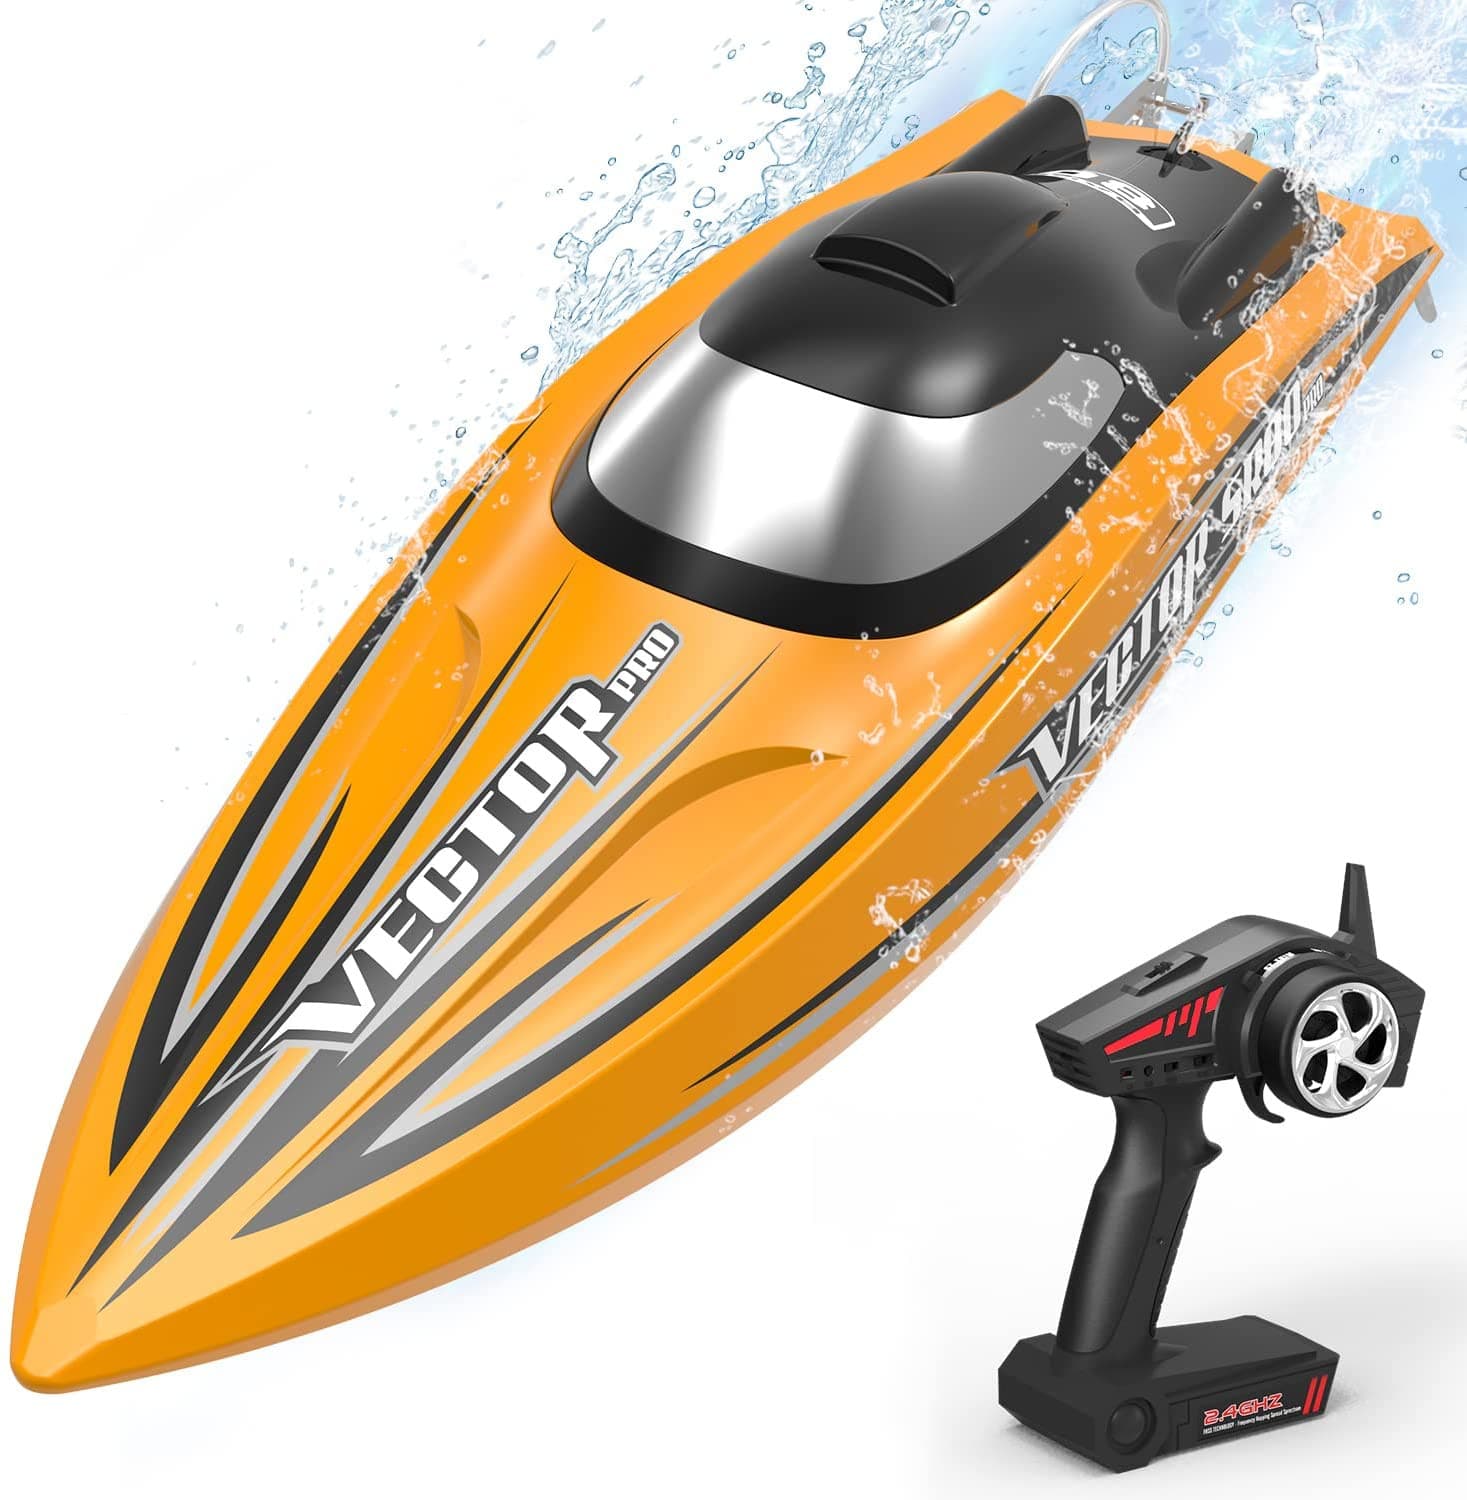 VOLANTEXRC VectorSR80 Pro Brushless RC Boat 50MPH High-Speed Auto Roll Back Waterproof RTR for Adults & Kids 79804P 1 pcs Battery